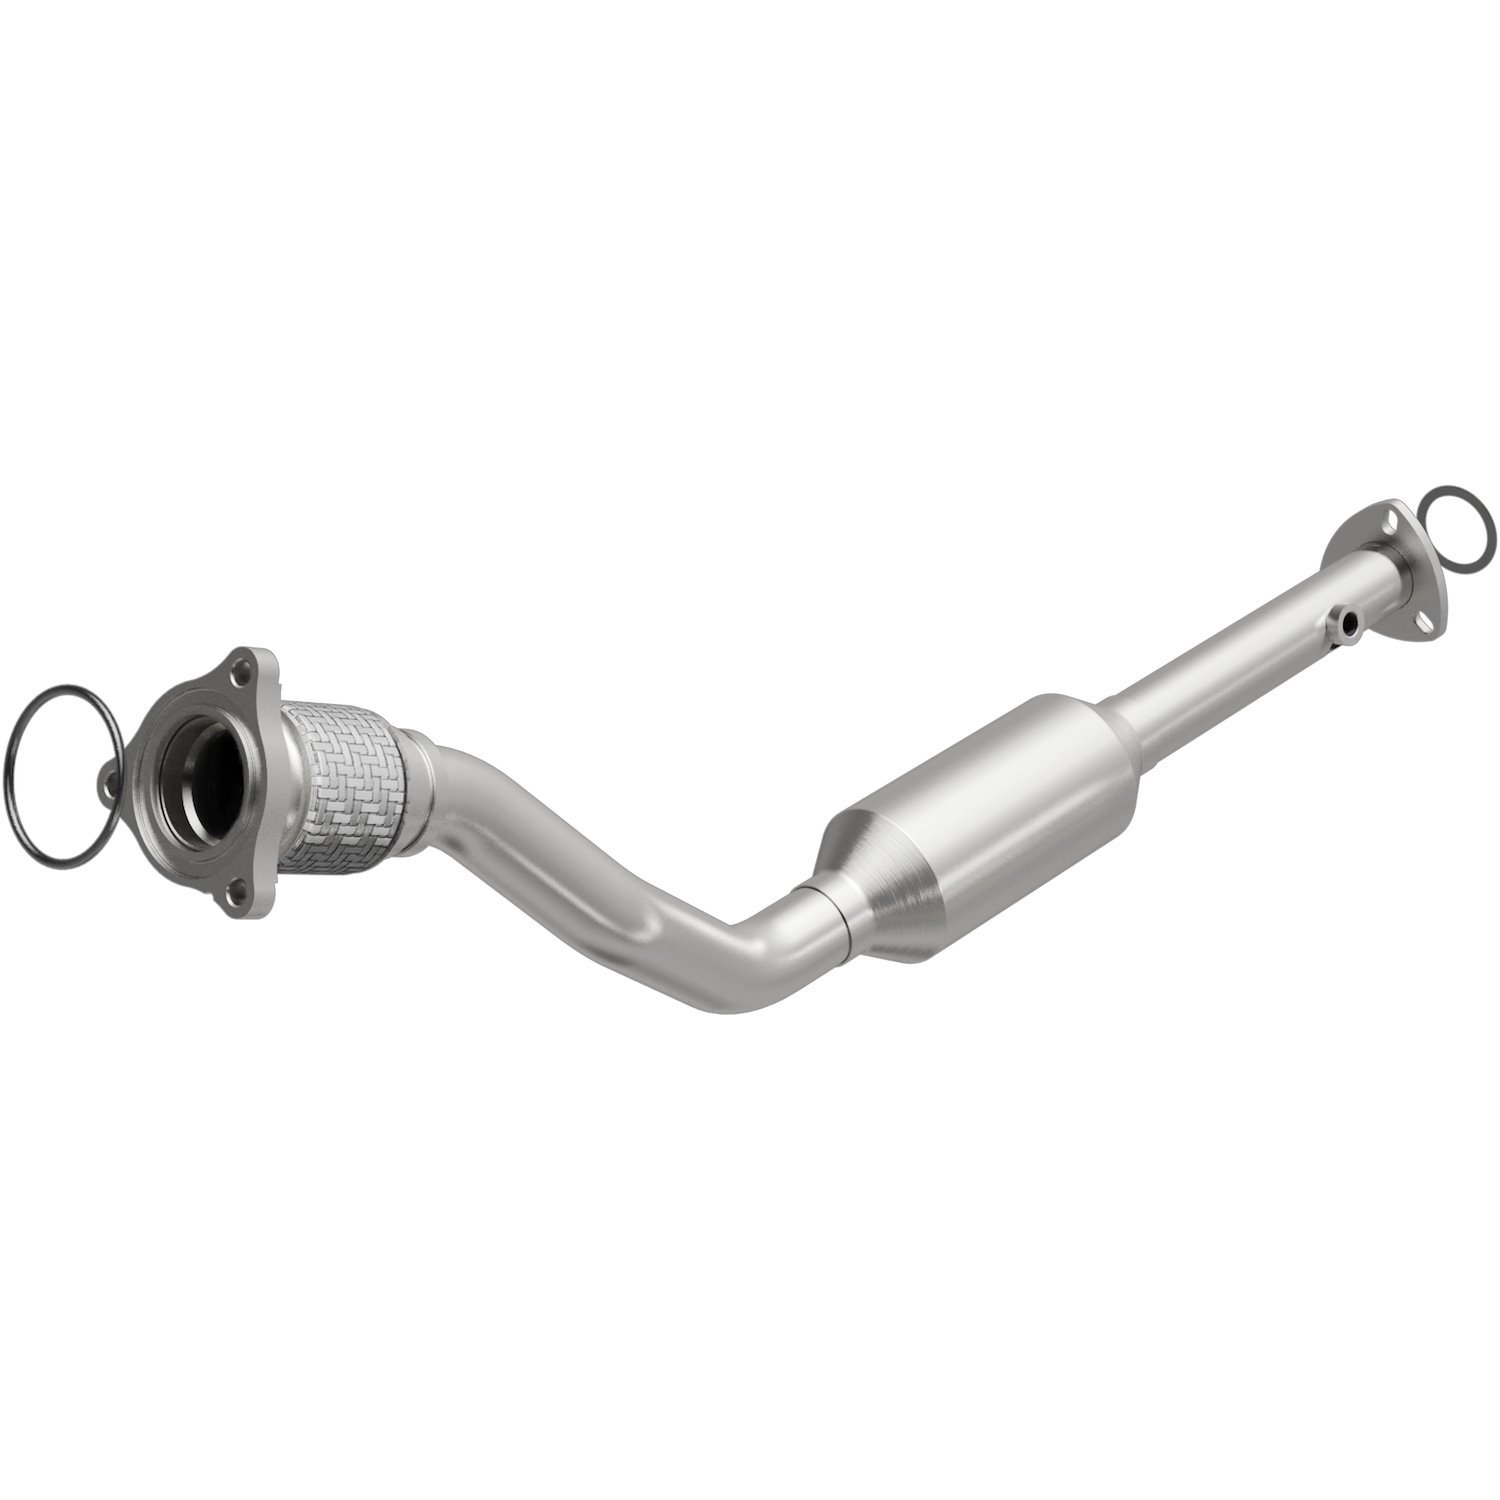 OEM Grade Federal / EPA Compliant Direct-Fit Catalytic Converter 51536